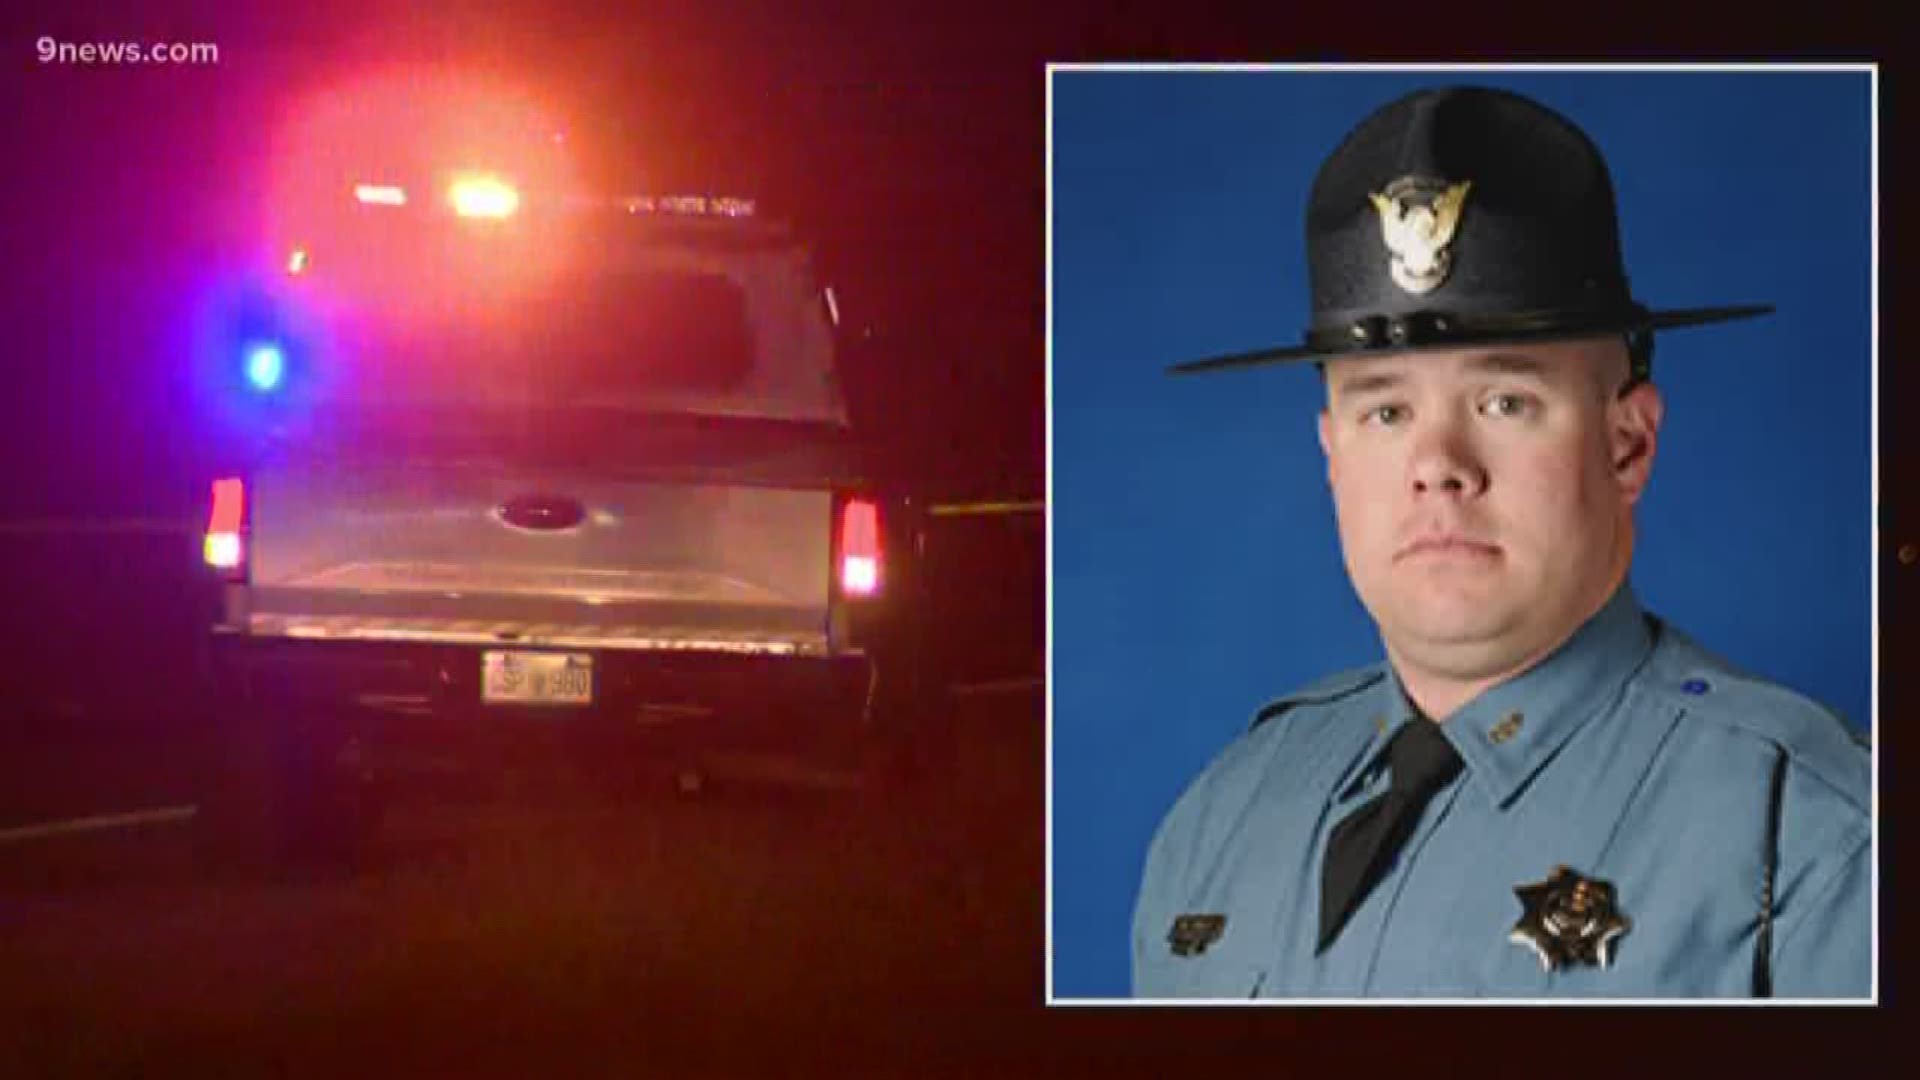 Trooper William Moden was hit and killed while he was investigating a crash where multiple people were ejected on I-70 in Arapahoe County.